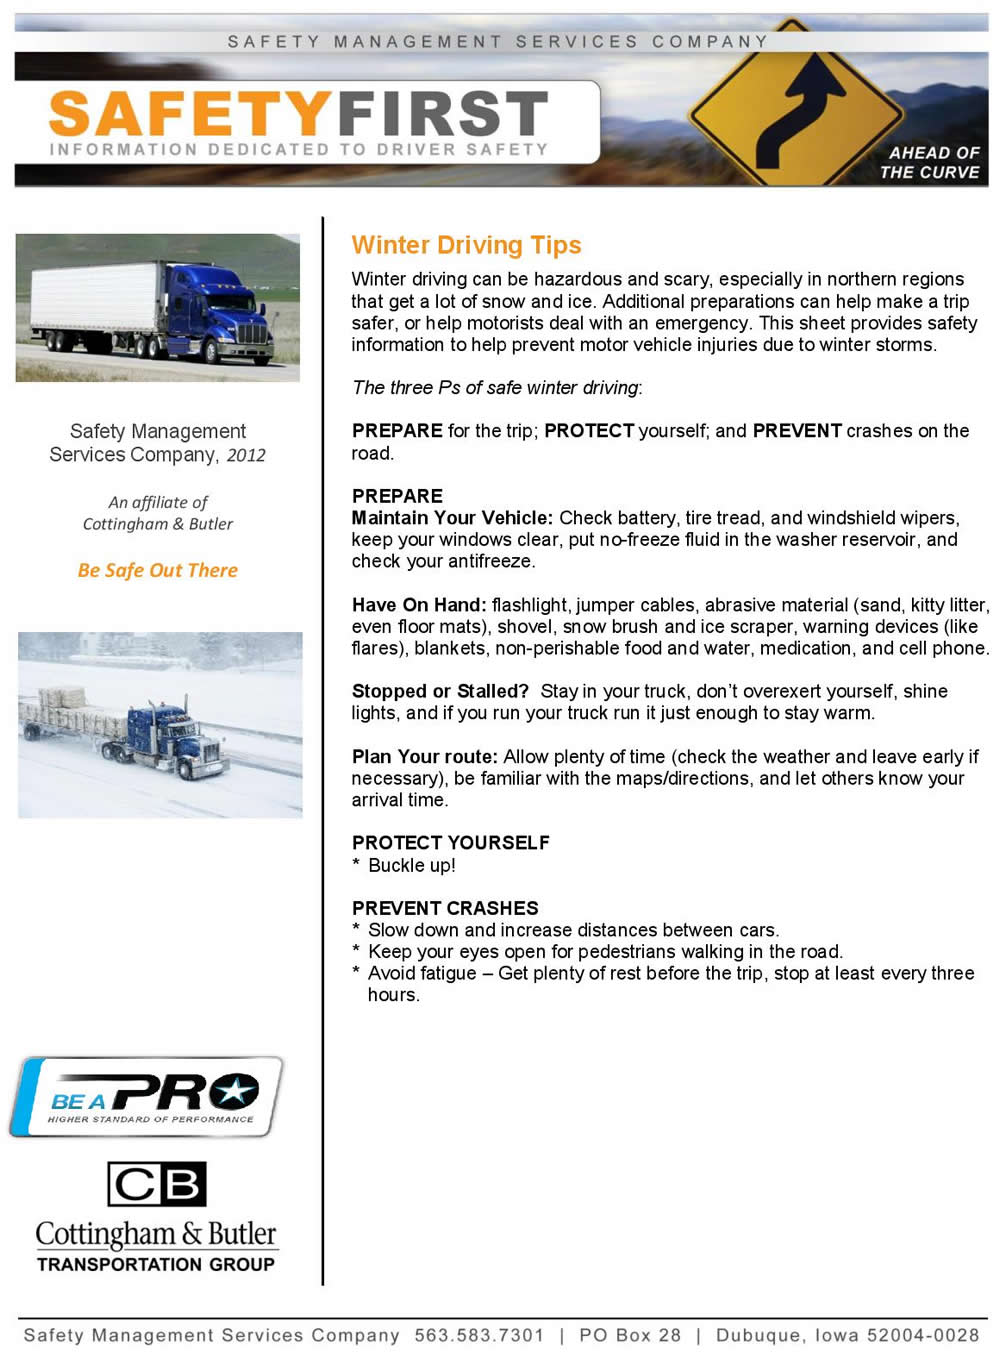 12WinterDrivingTips-page-001